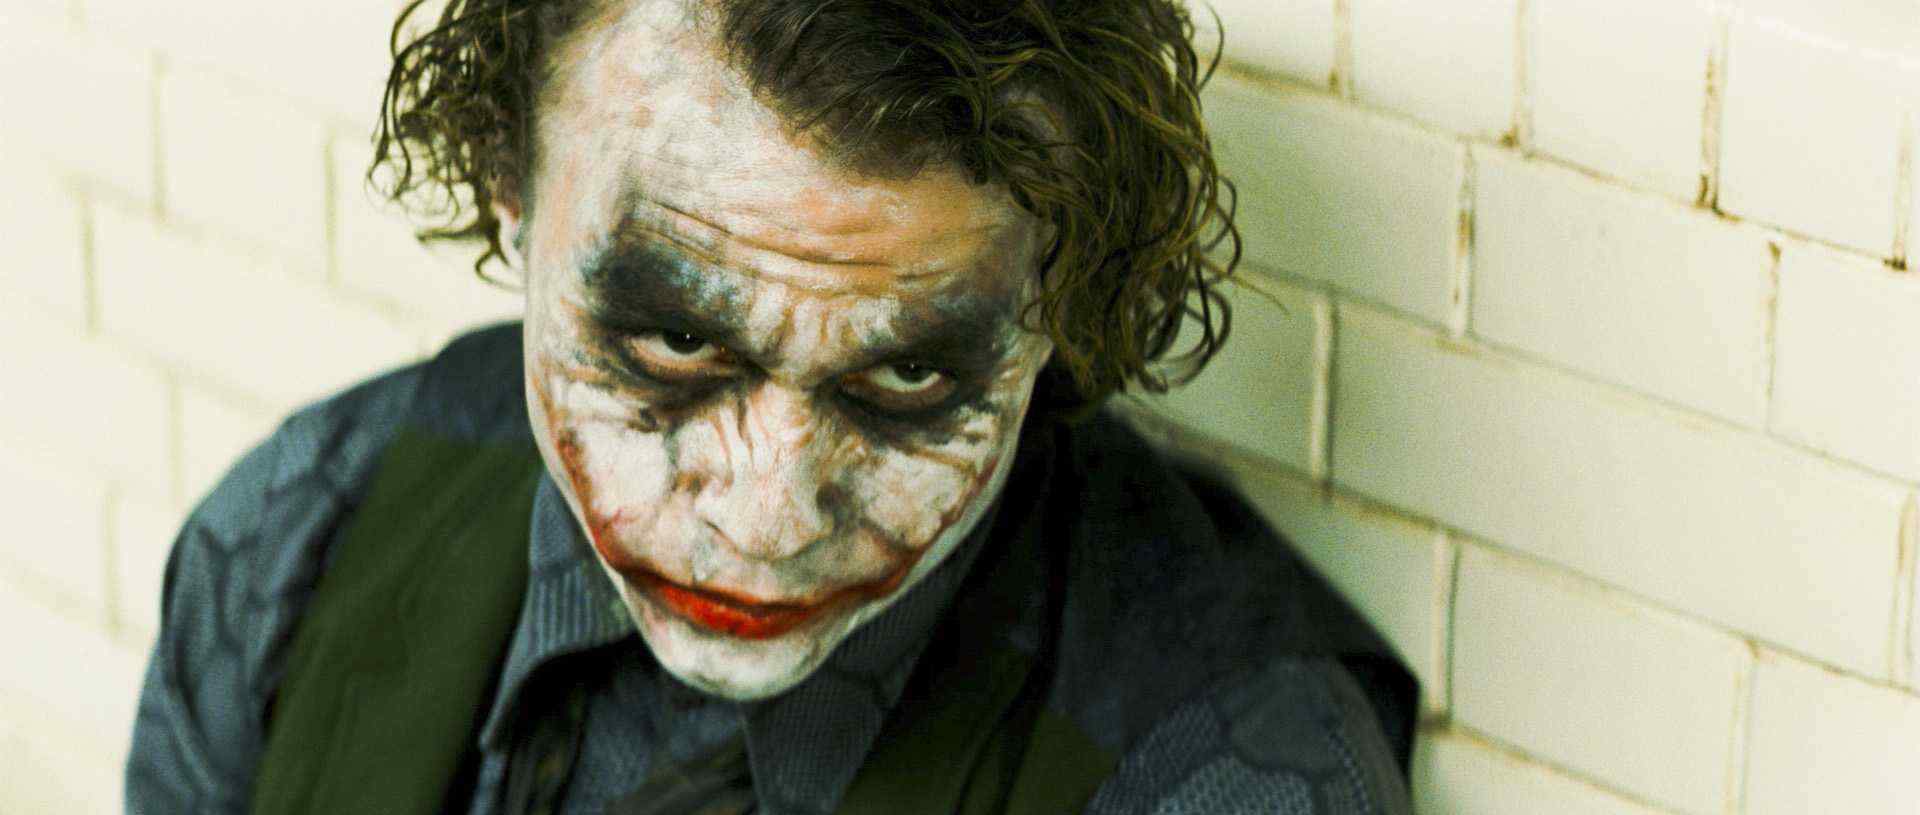 HEATH LEDGER stars as Joker in Warner Bros. Pictures' and Legendary Pictures' action drama 